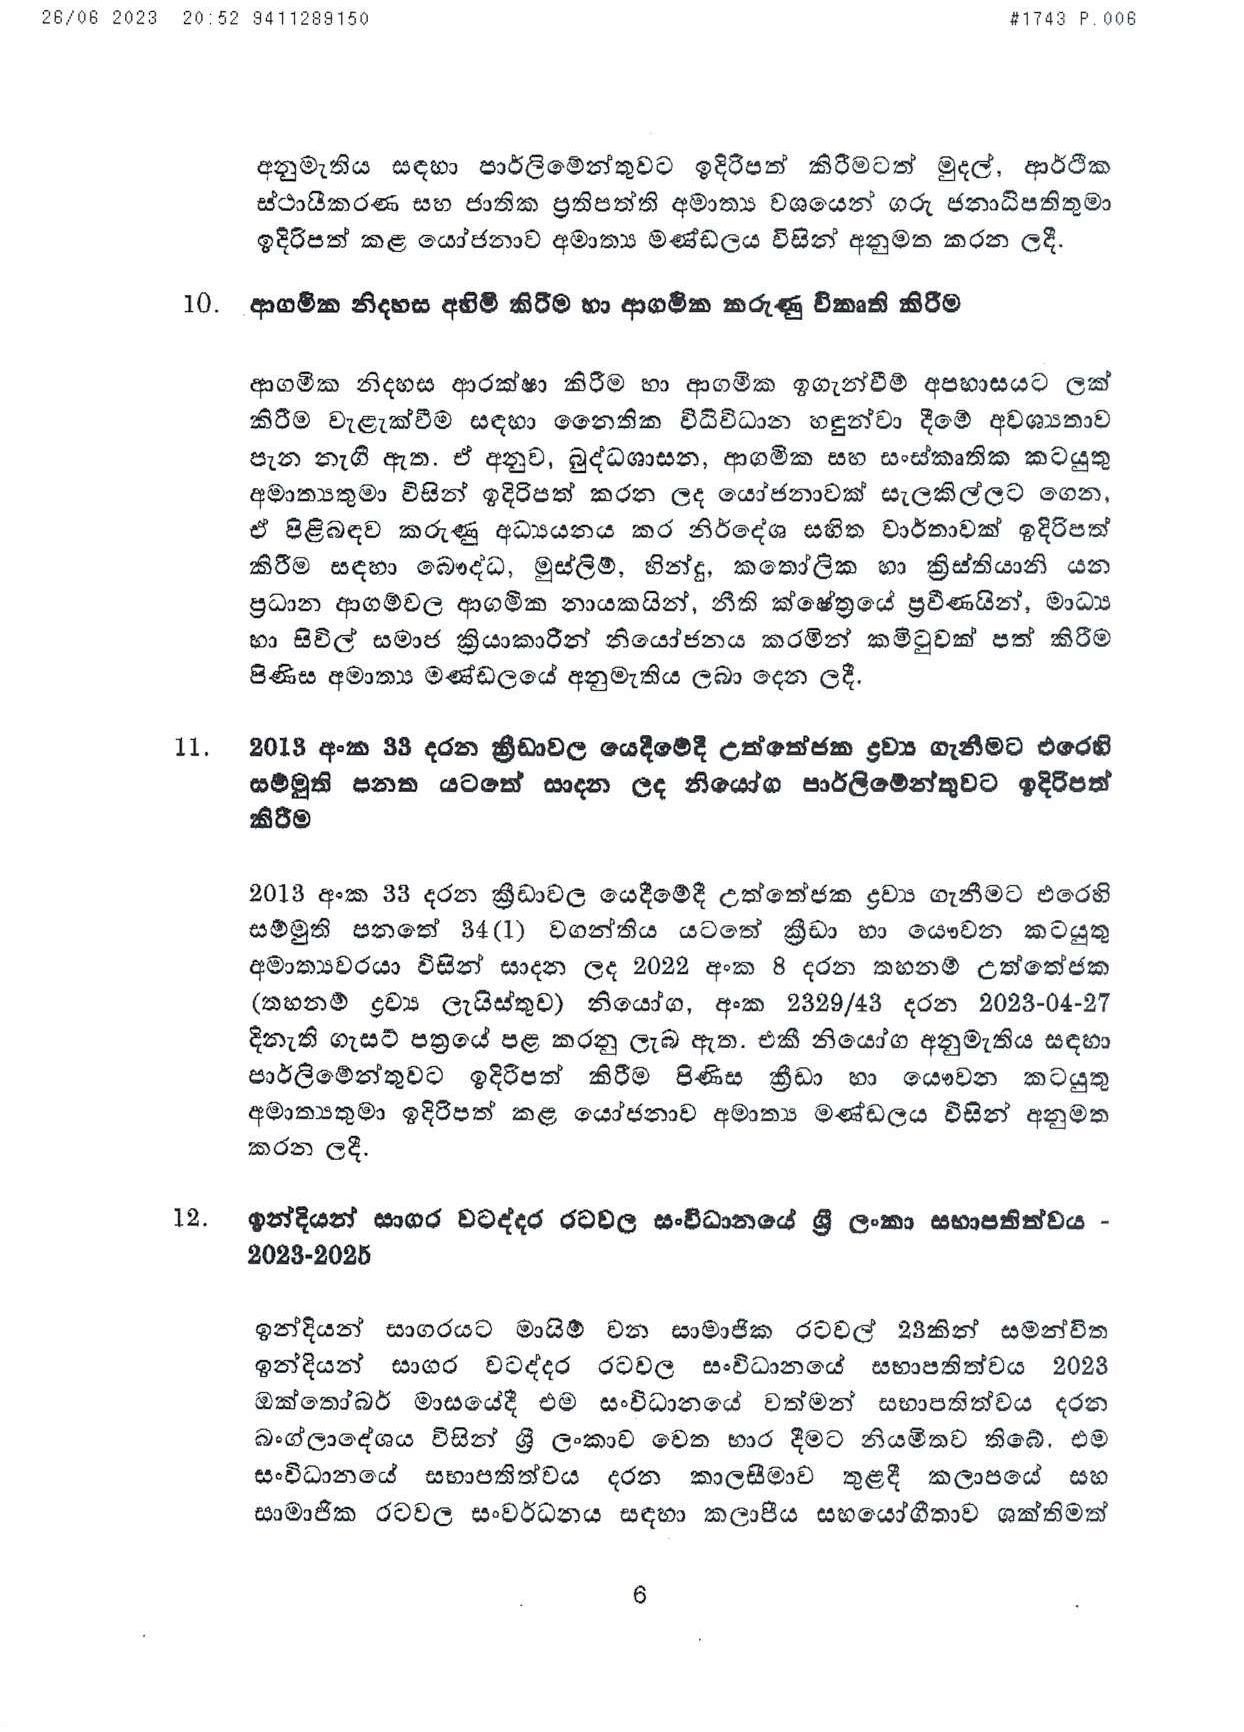 Cabinet Decision on 26.06.2023 page 006